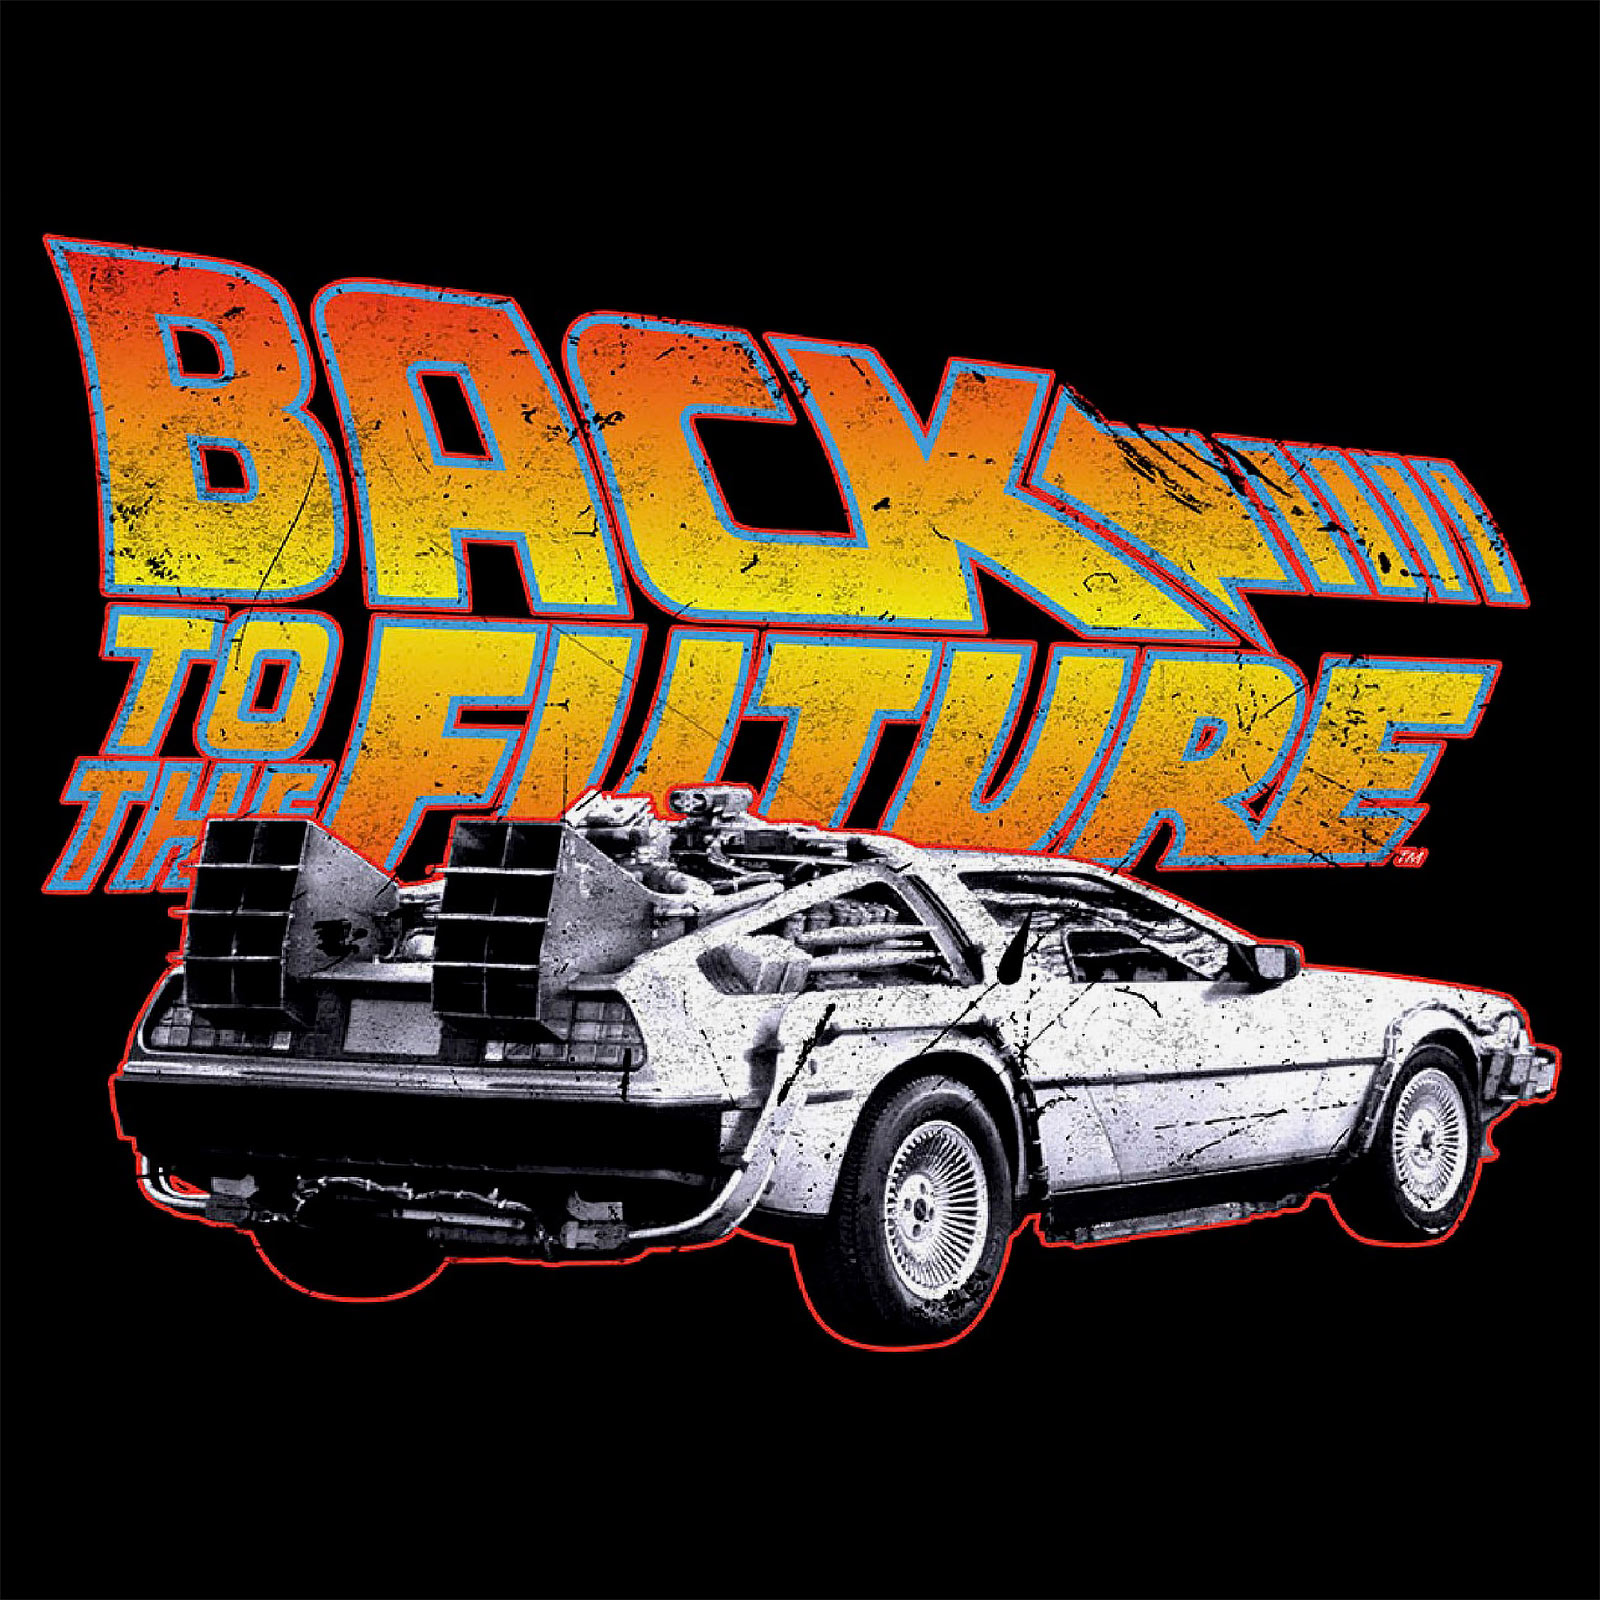 Back to the Future - Logo T-Shirt